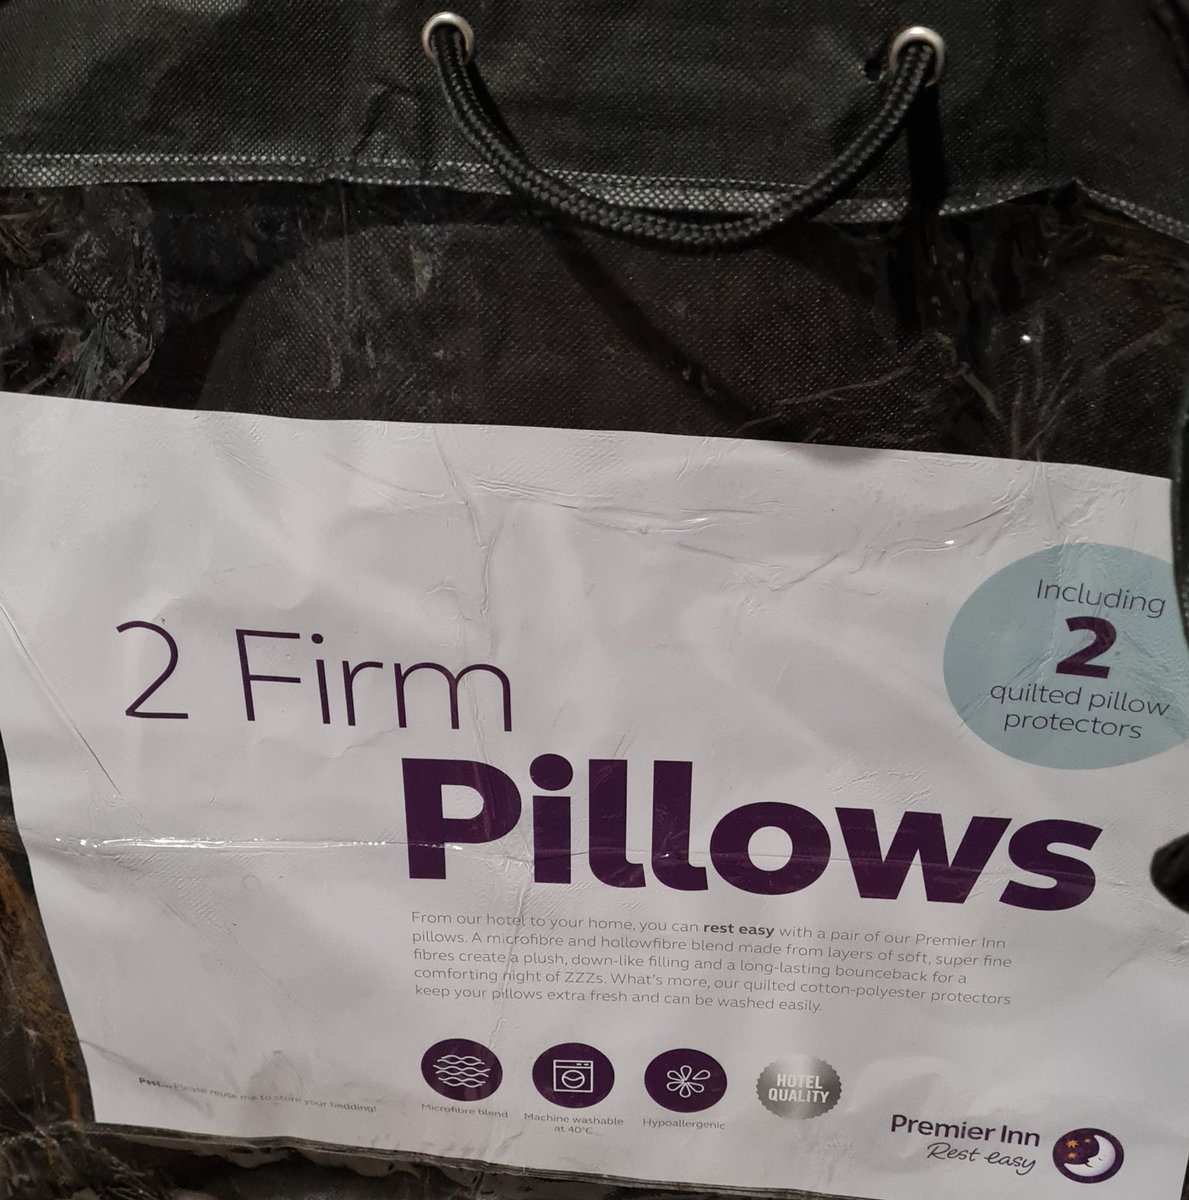 @premierinn Not often i actually buy myself good pillows, normally just await a stay at a hotel,  but after last nights sleep, I'm converted as to now having decent ones. Must be getting older 🤣😴😴
#RestEasy #pillows #goodnightssleep #PremierInn